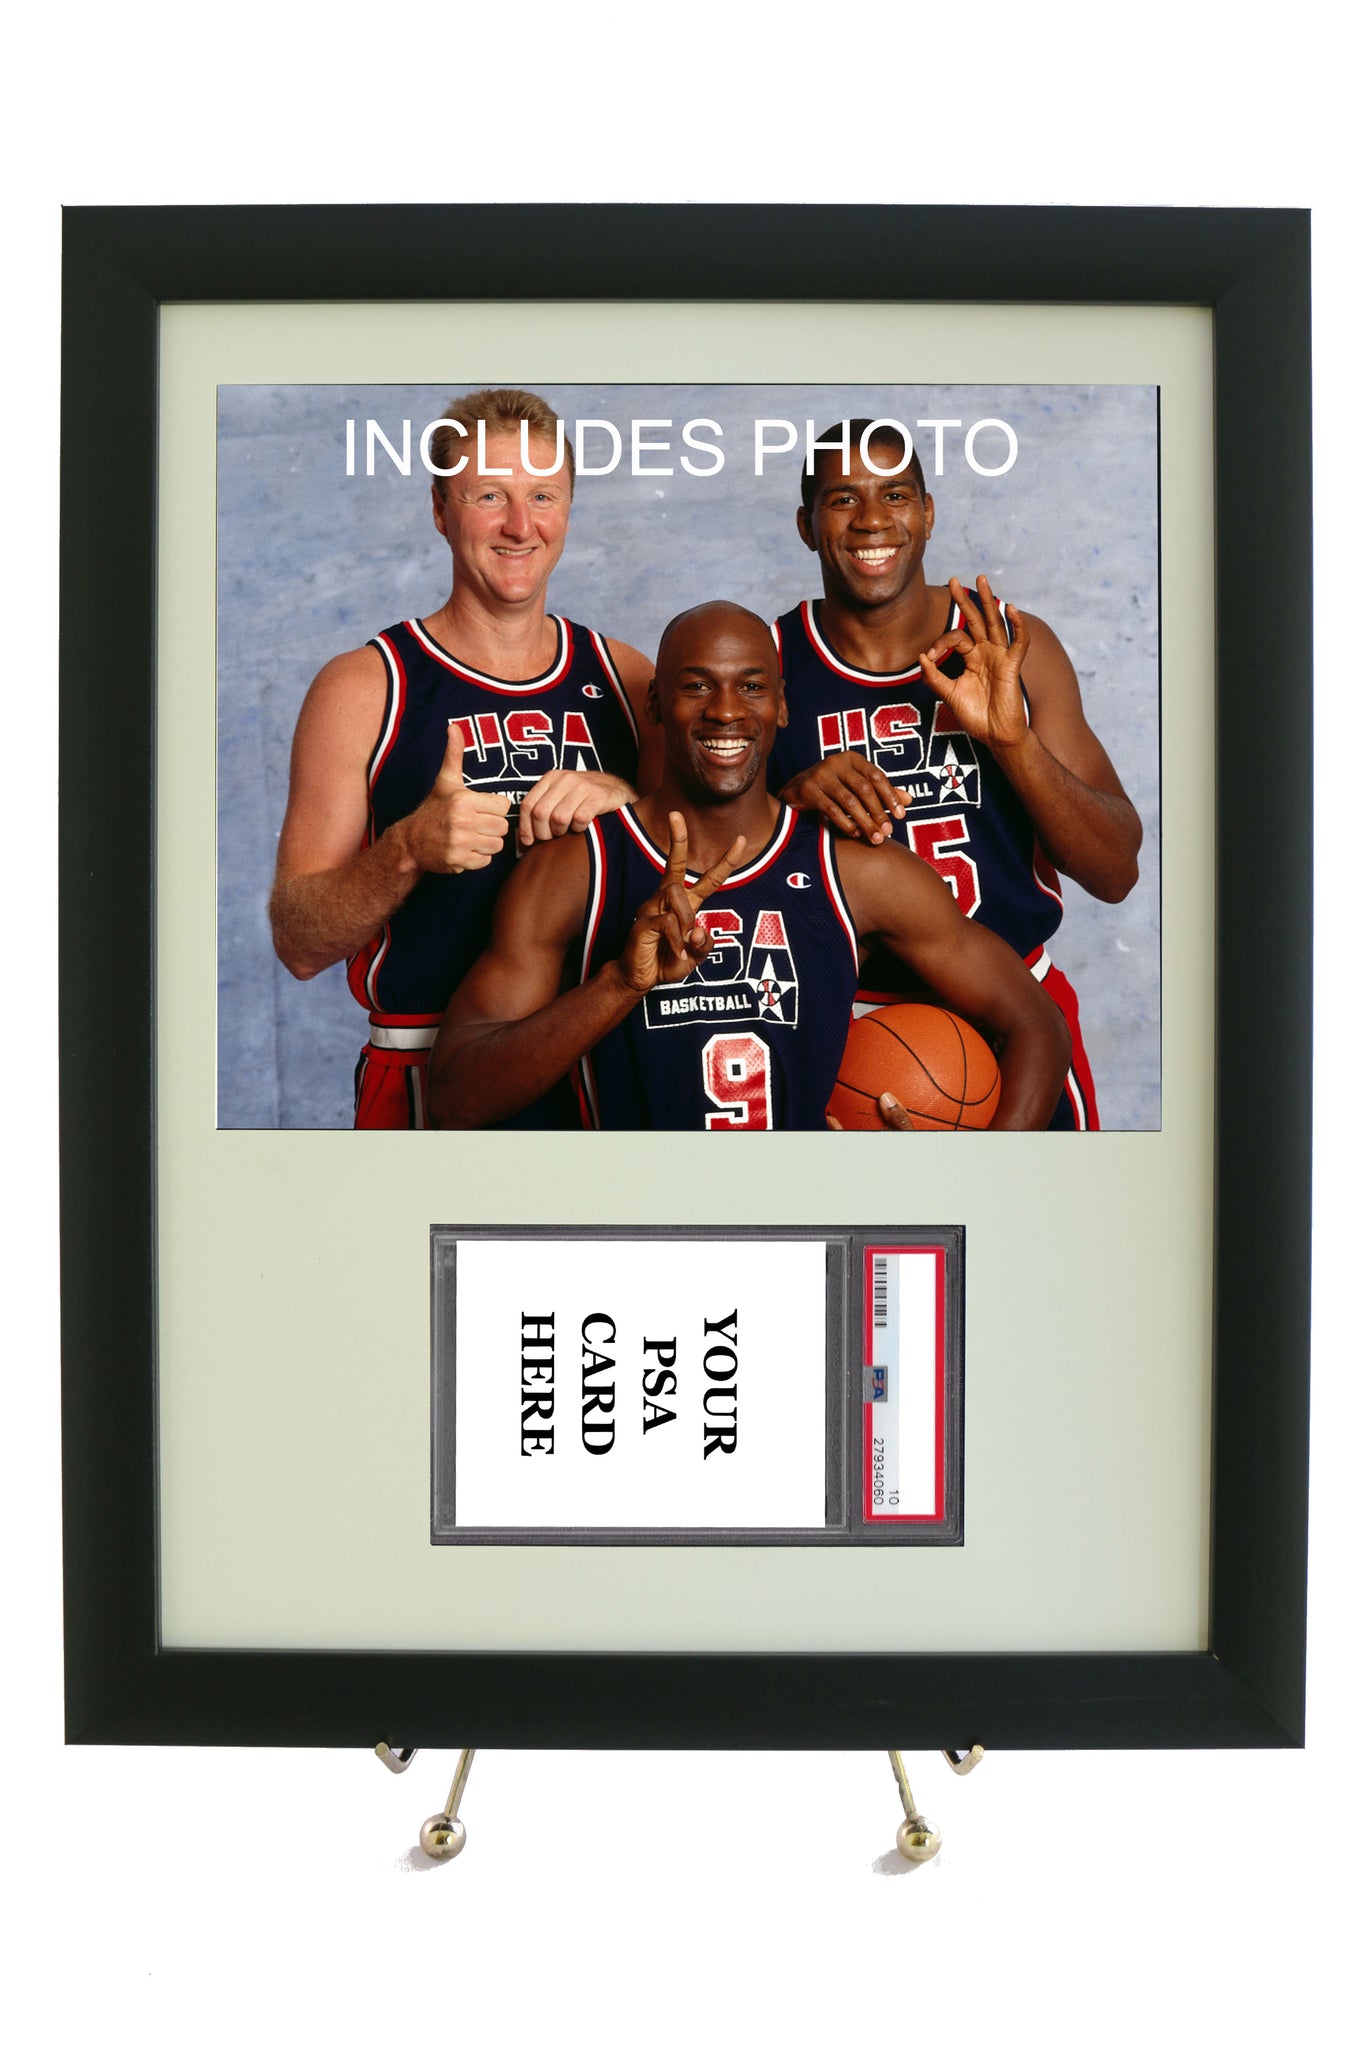 Sports Card Frame for YOUR PSA Larry Bird Card (INCLUDES PHOTO) - Graded And Framed